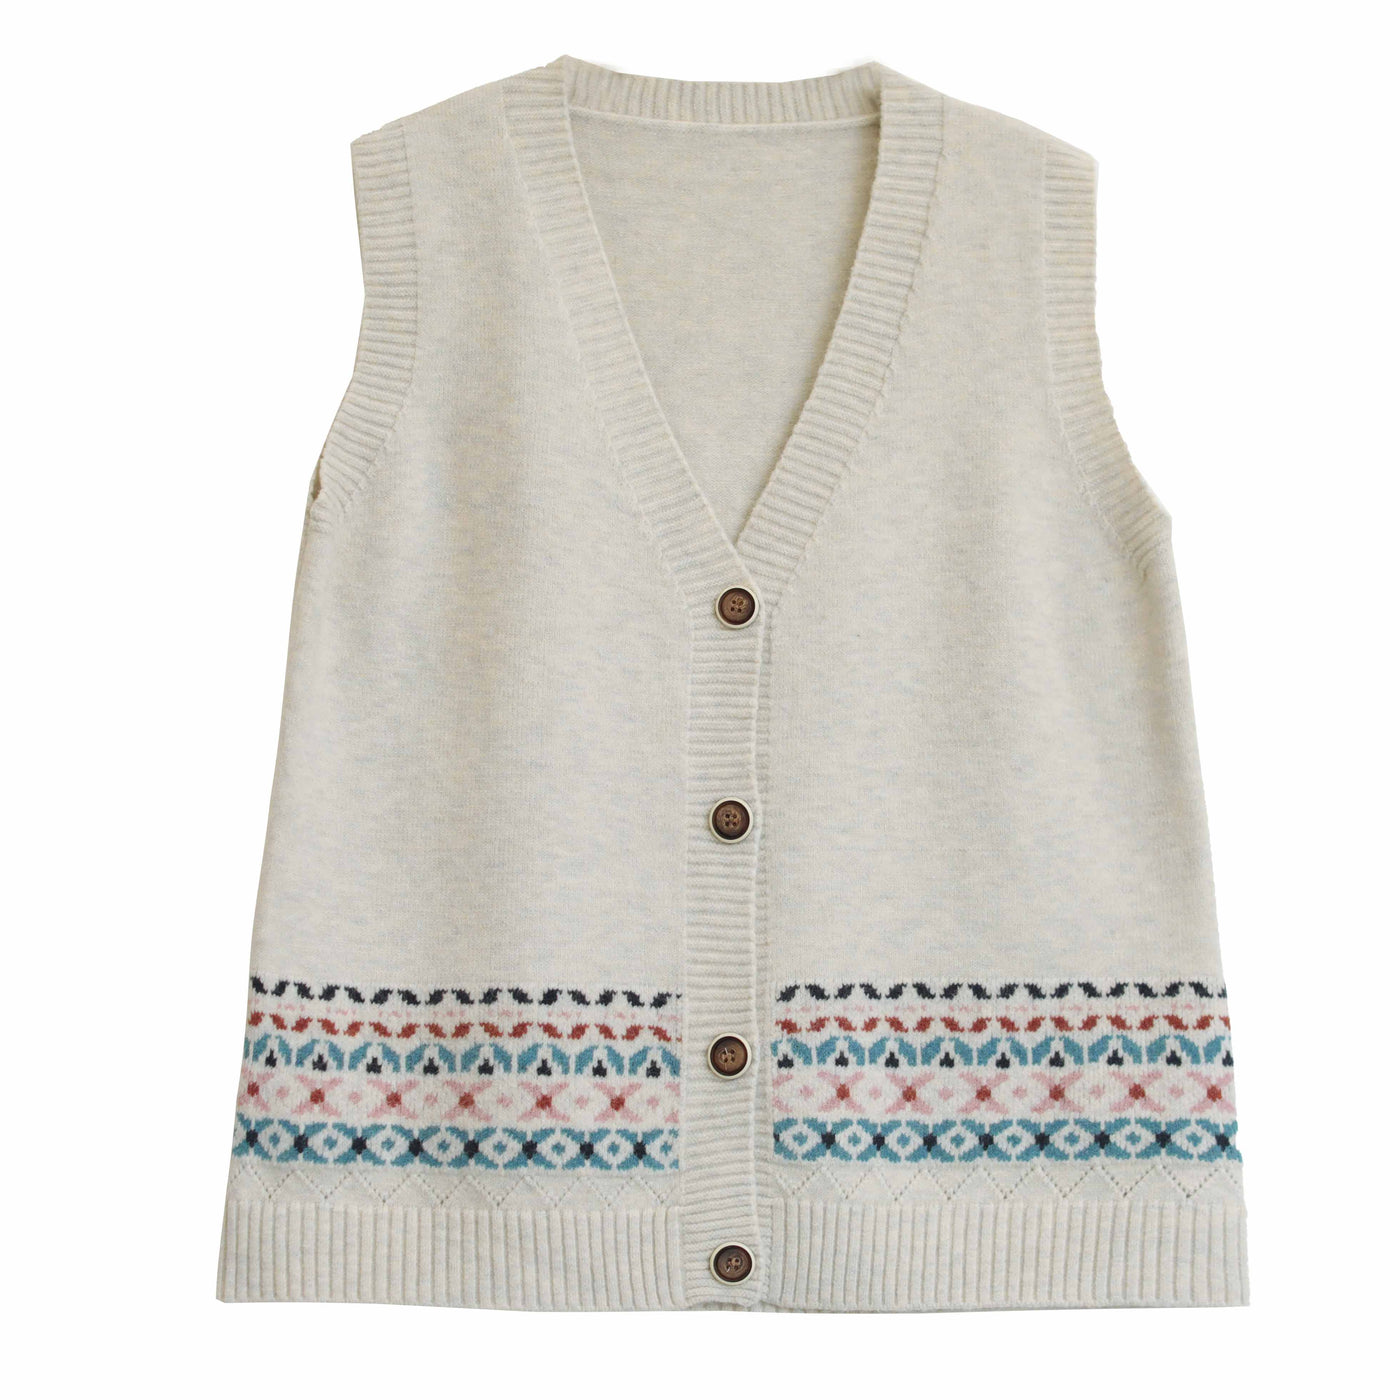 Women Retro V-Neck Cotton Knitted Casual Waistcoat Sep 2022 New Arrival 